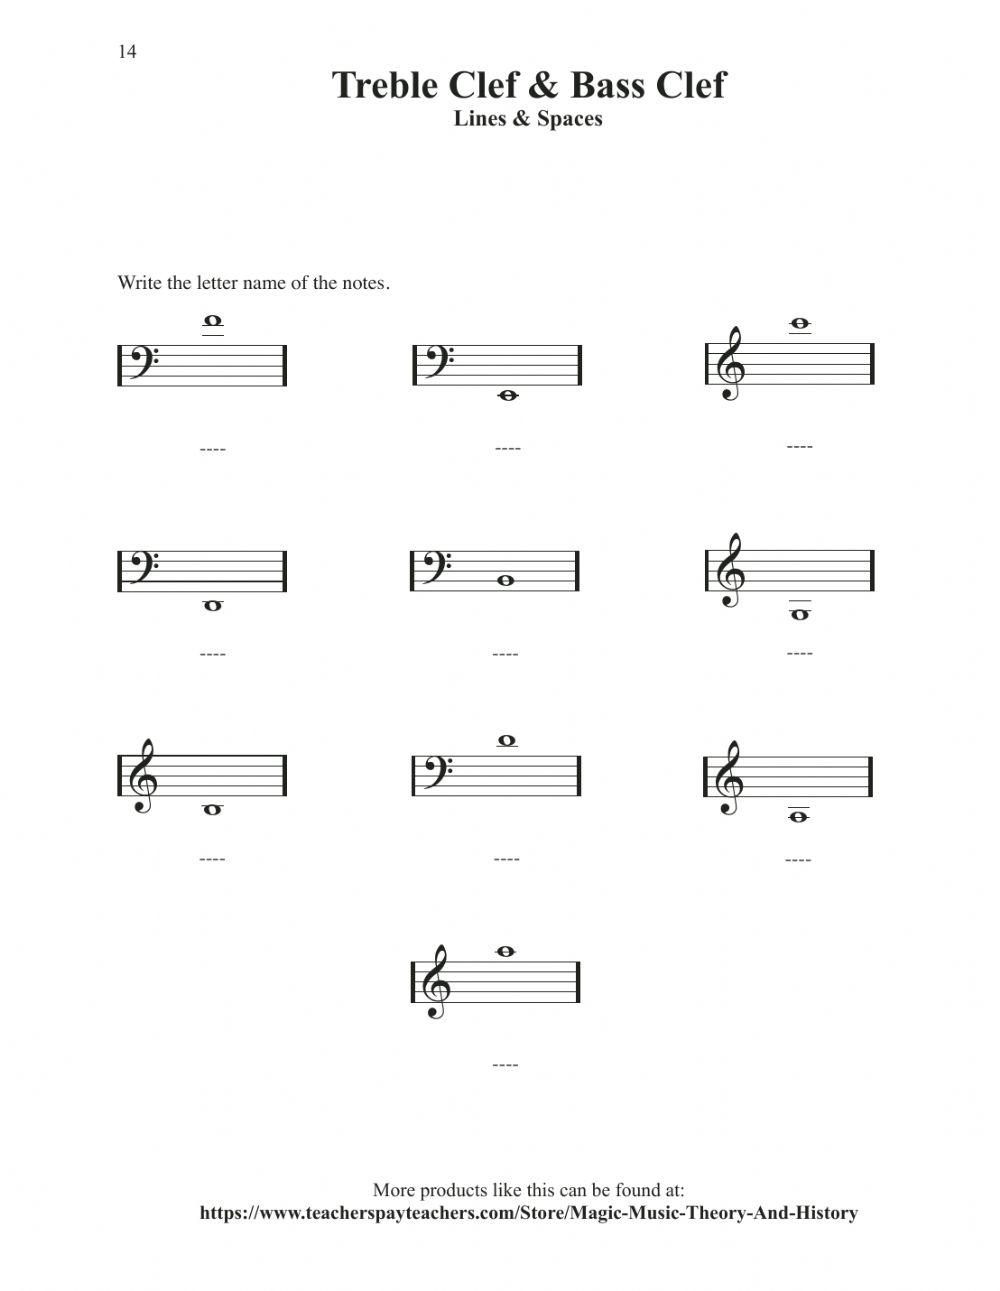 Treble Clef and Bass Clef Ledger Lines 2